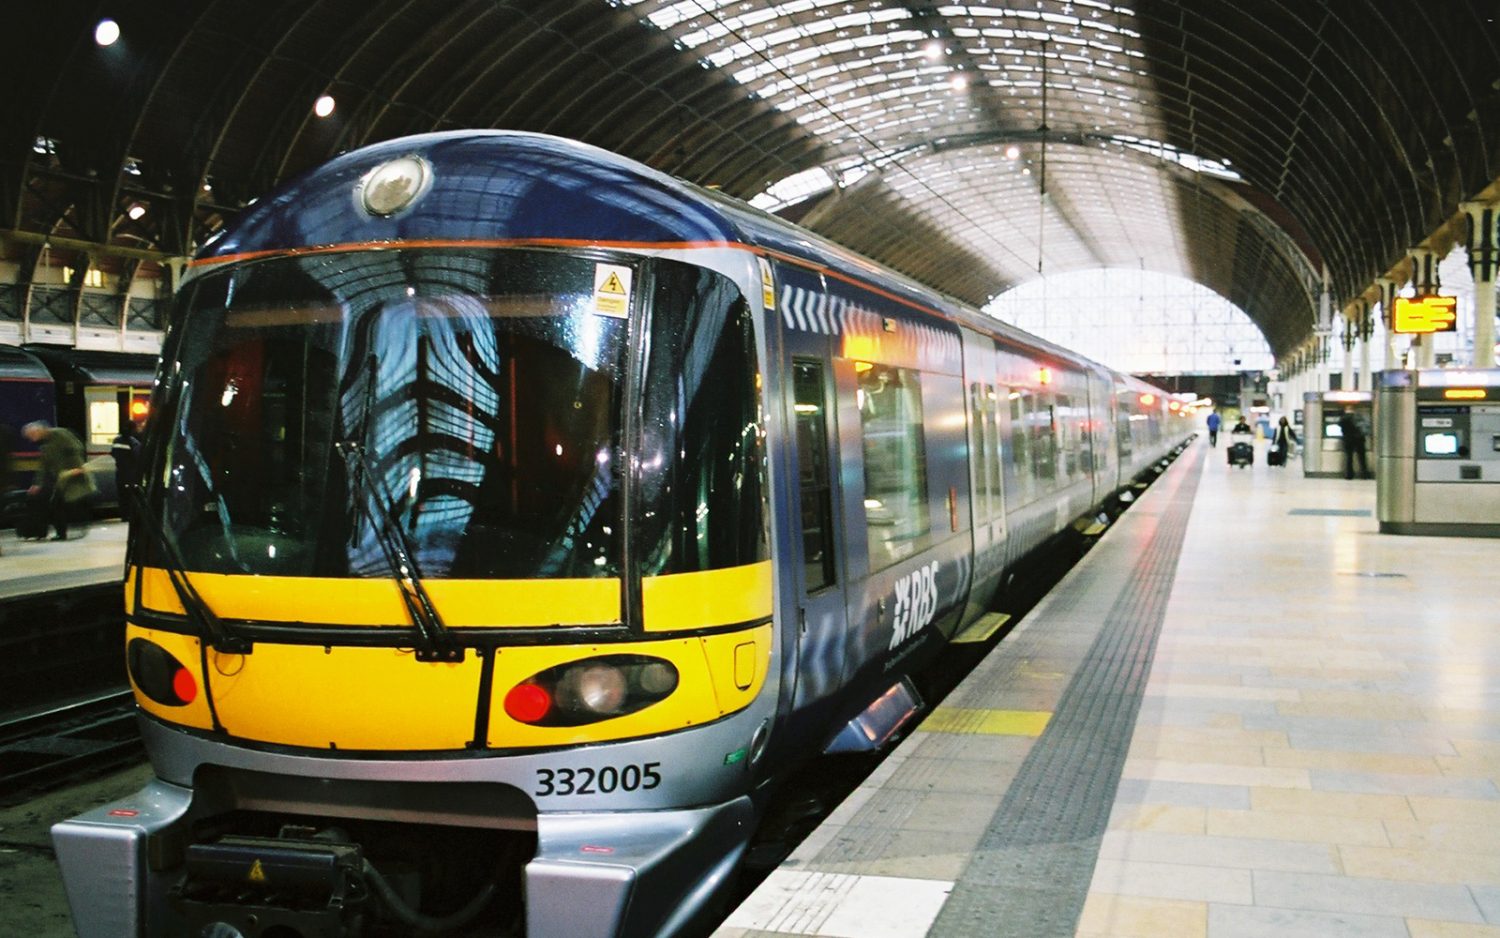 London Heathrow Express Tickets - Only 